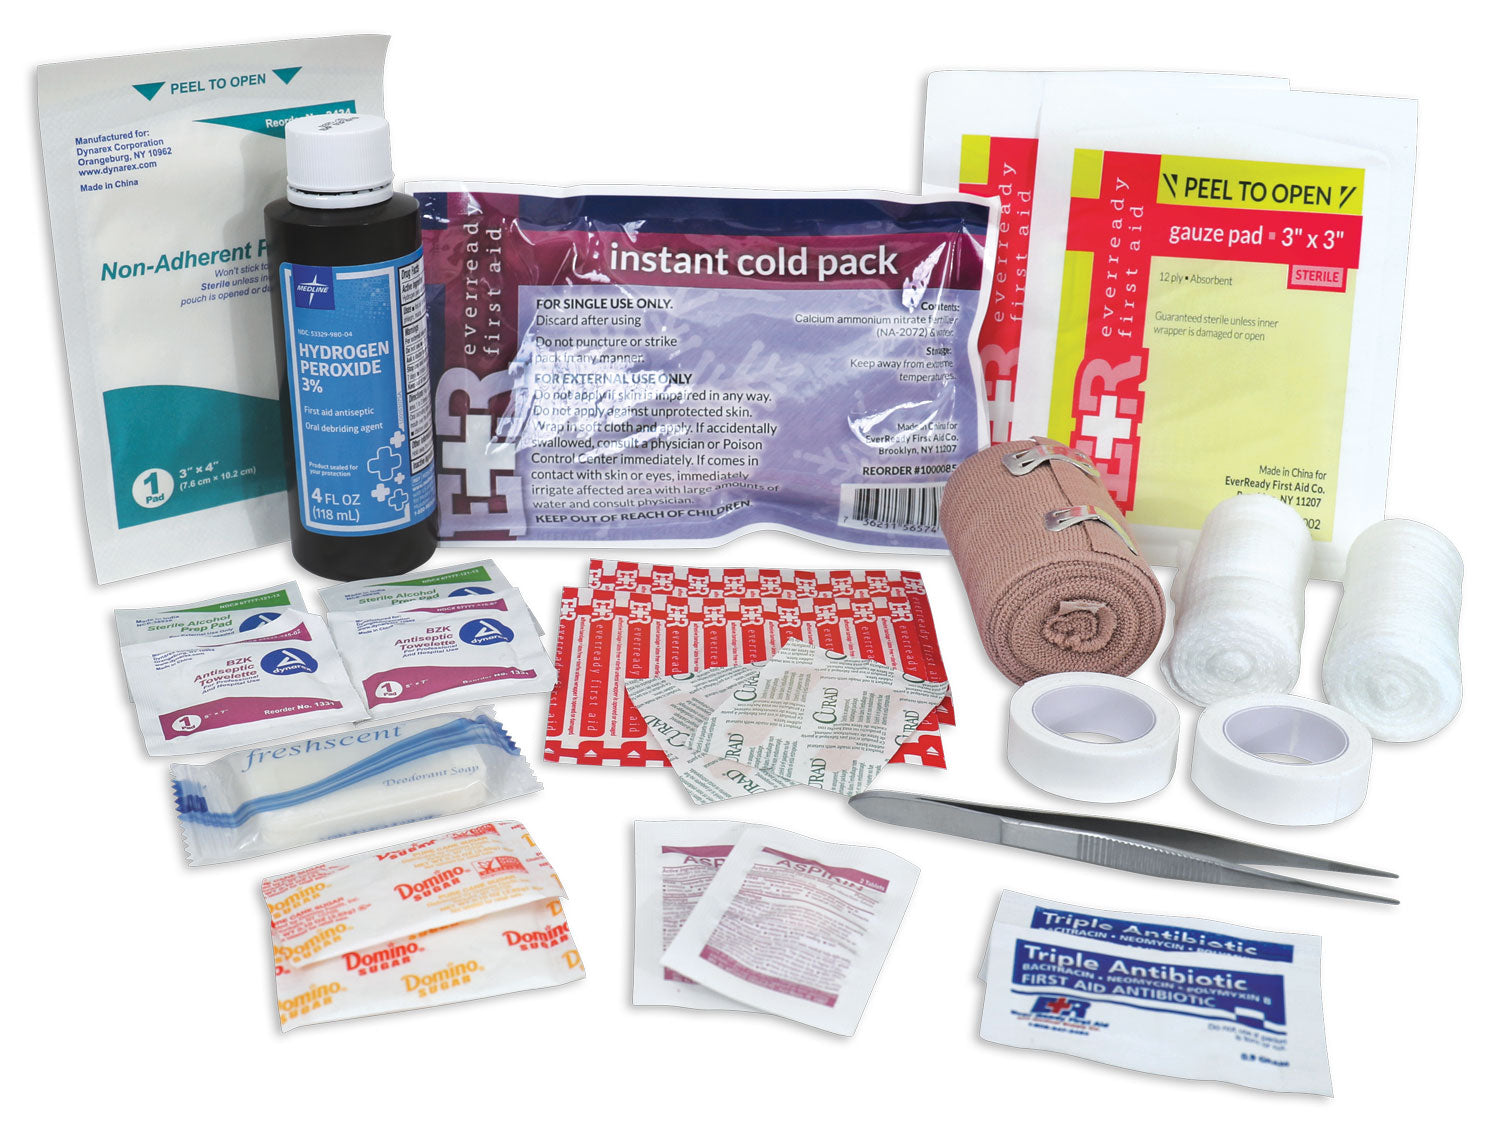 Rothco Tactical First Aid Kit Contents - Tactical Choice Plus